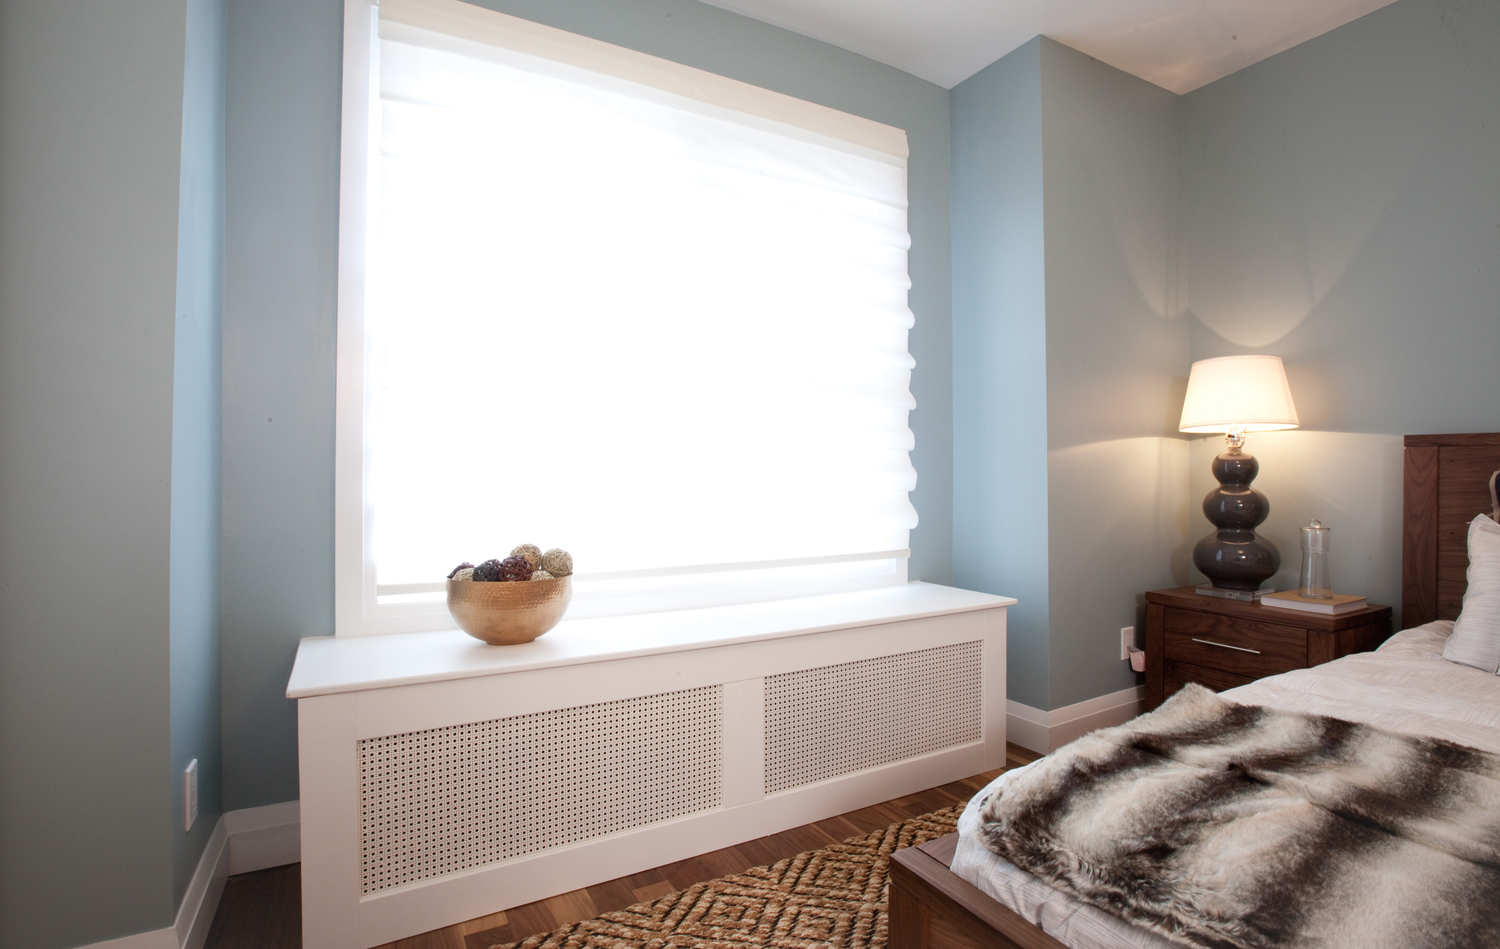 Contemporary bedroom with fur throw and sleek radiator cover